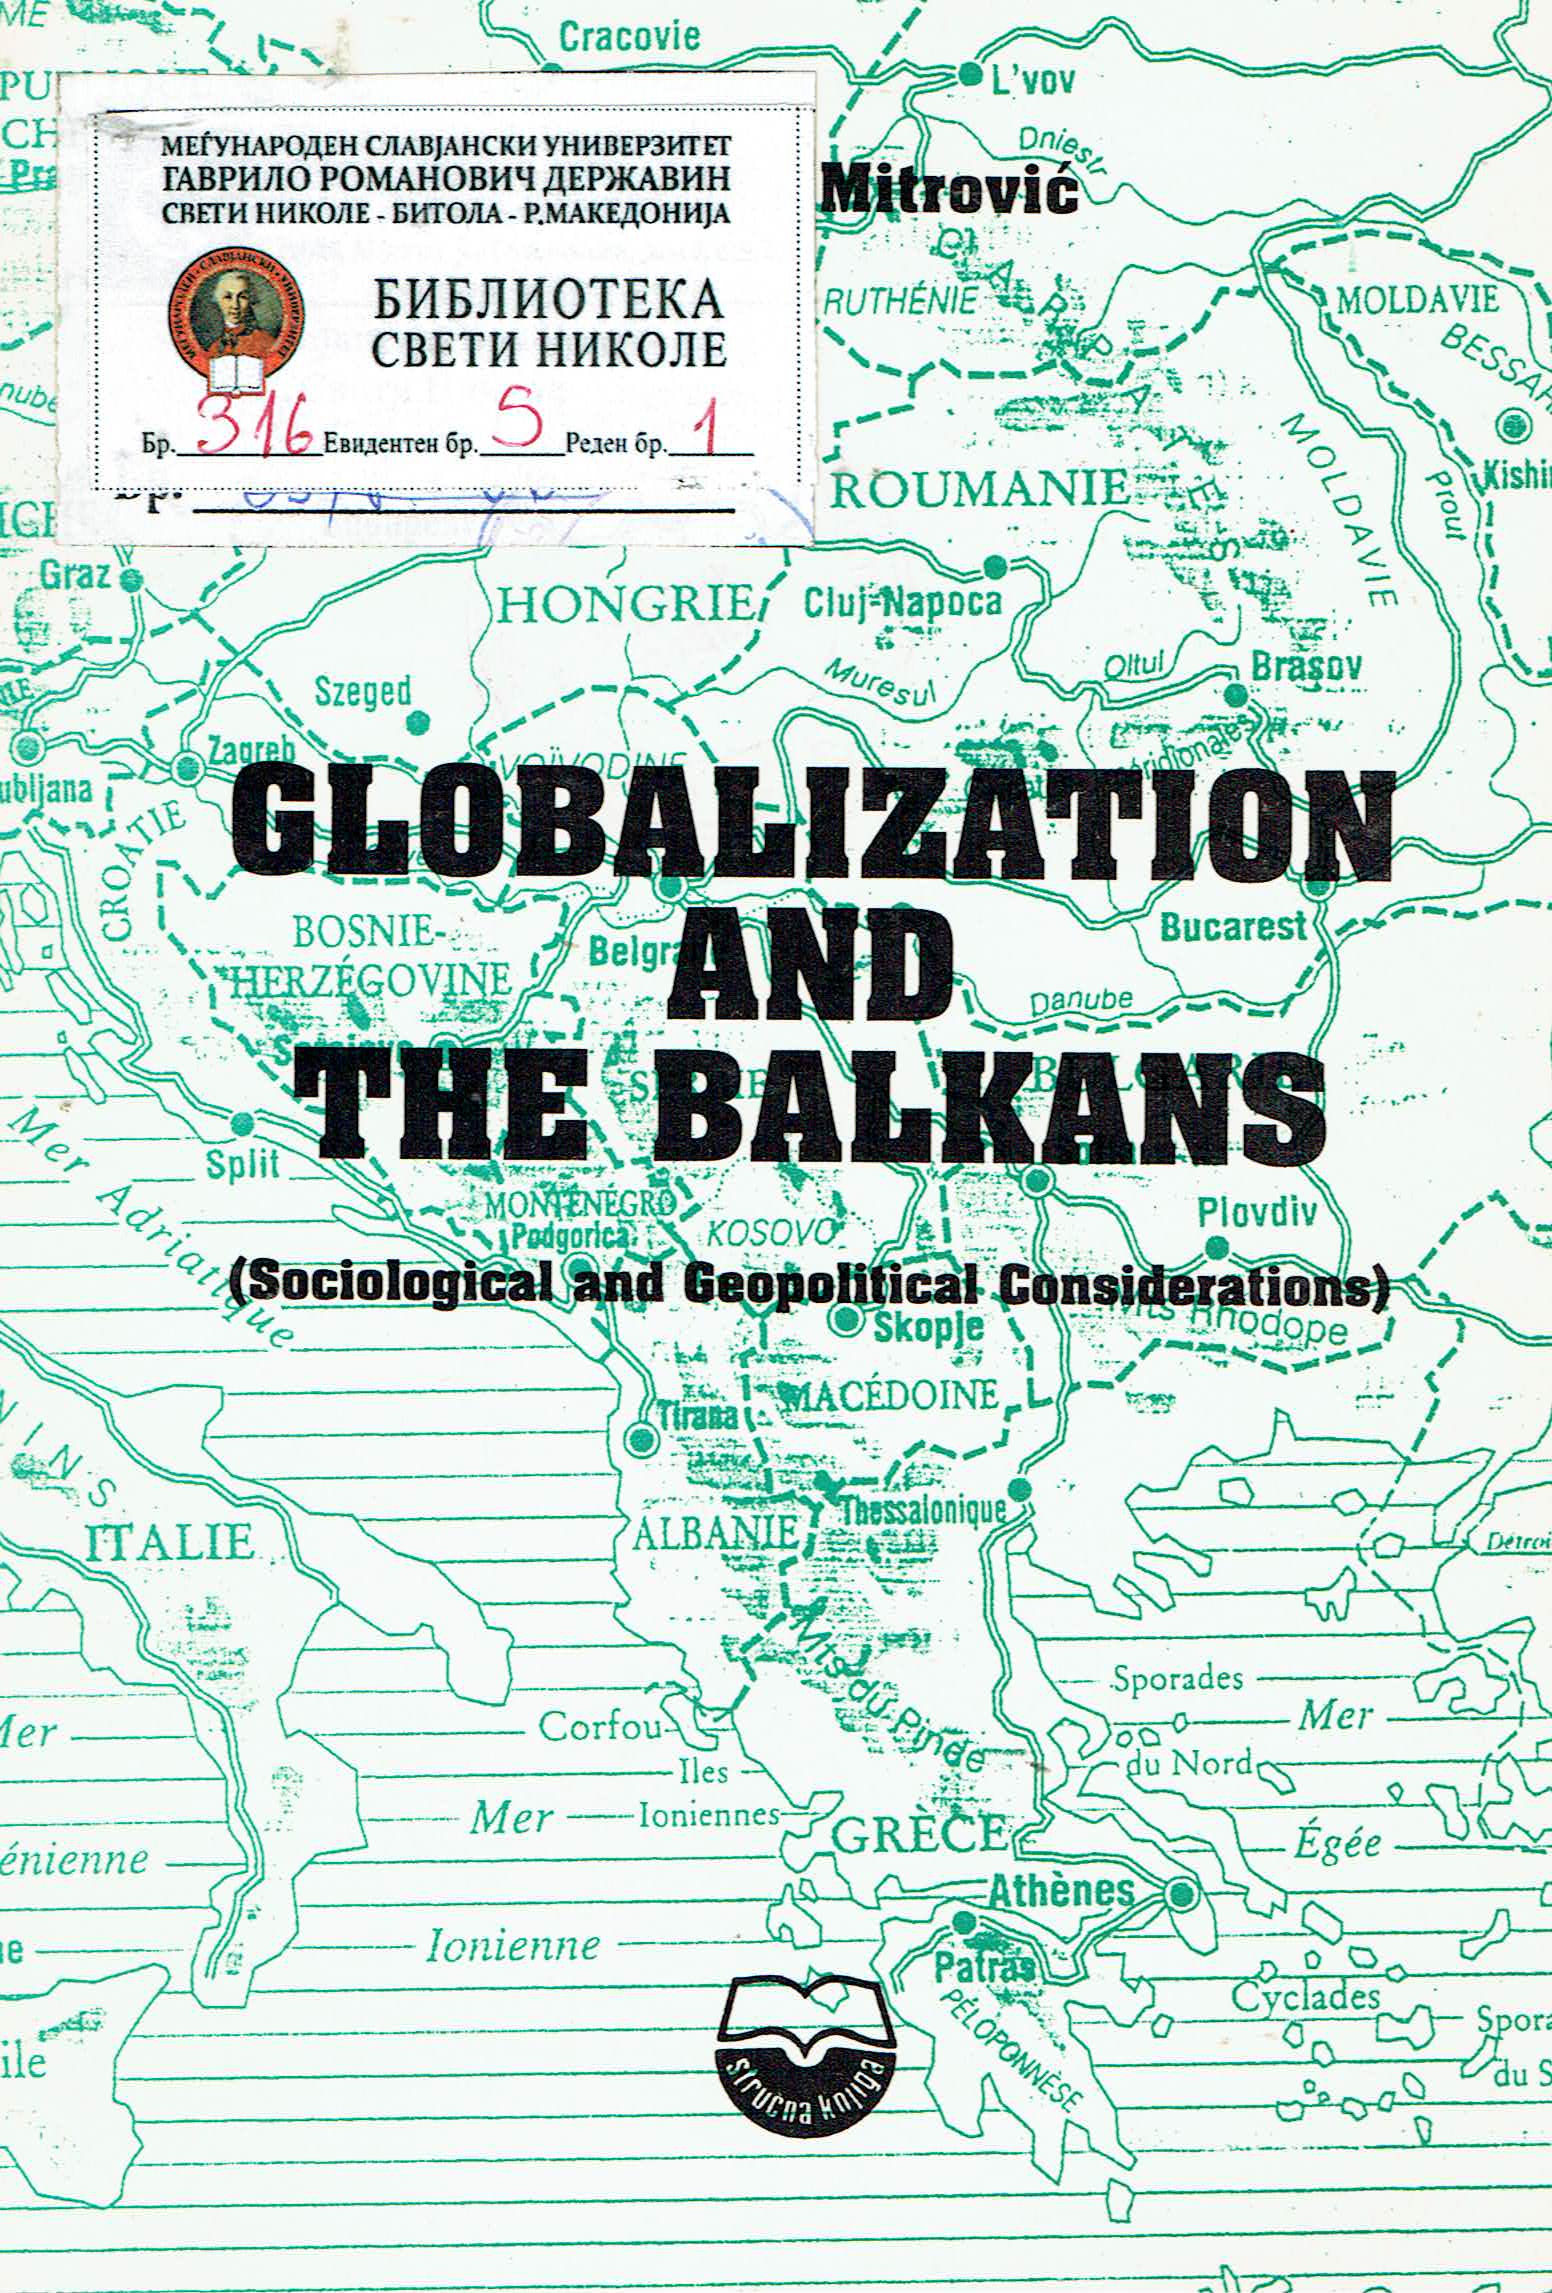 GLOBALIZATION AND THE BALKANS